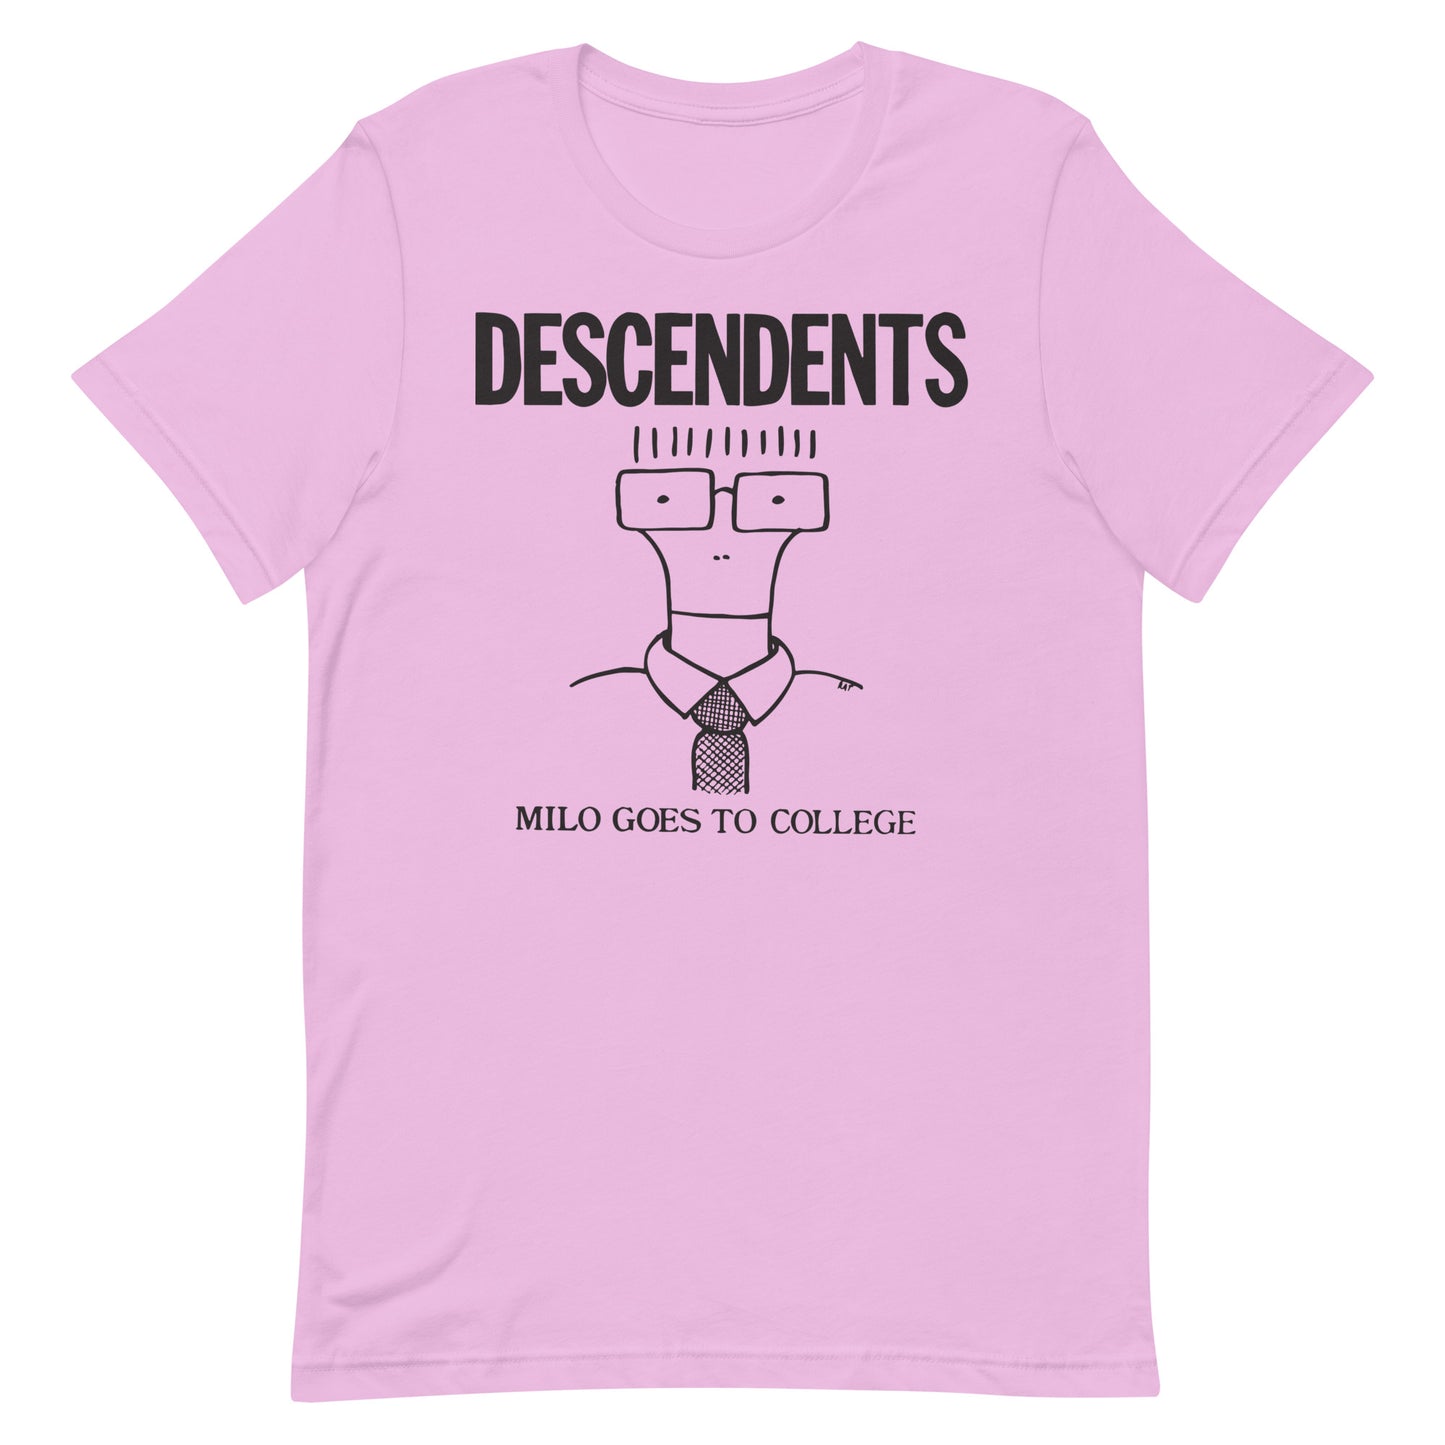 Descendents - Milo Goes To College T-Shirt